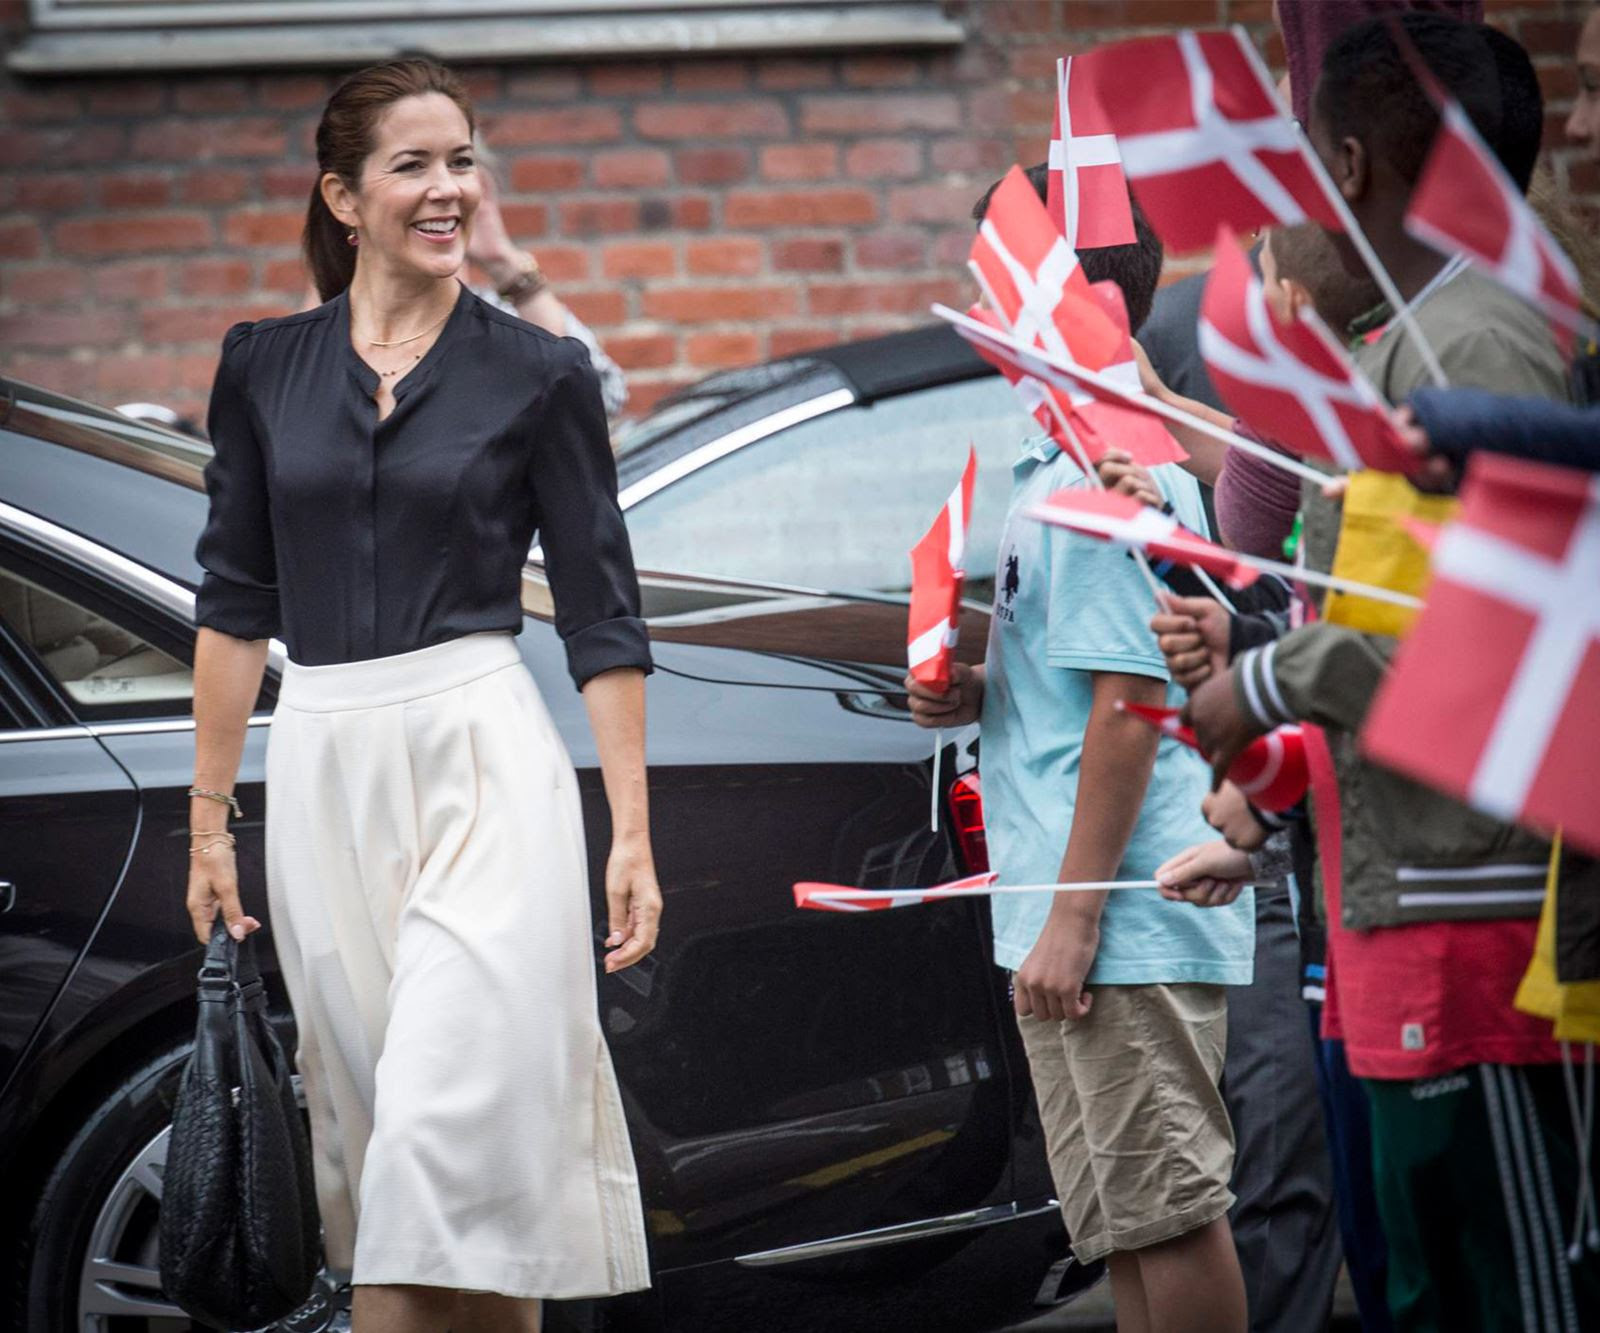 Princess Mary passionately advocates for anti-domestic abuse at Loving Measure event:Crown Princess Mary of Denmark was greeted by excited year eight students as she arrived at Guldberg academy in Copenhagen to participate in the *Loving Measure* event.